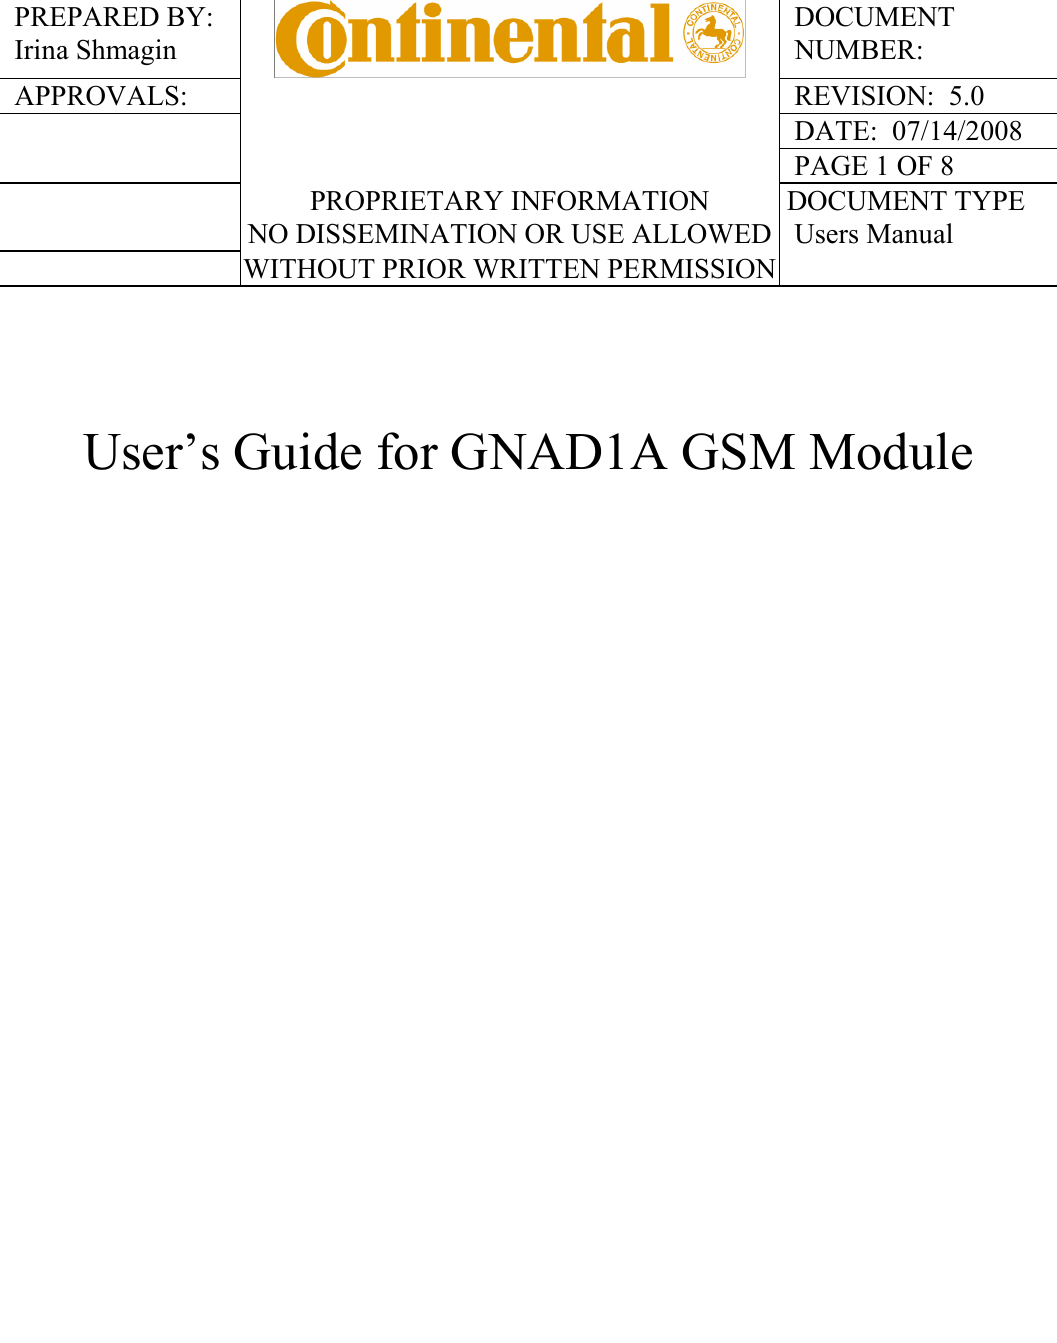  PREPARED BY: Irina Shmagin   DOCUMENT NUMBER: APPROVALS:    REVISION:  5.0     DATE:  07/14/2008     PAGE 1 OF 8   PROPRIETARY INFORMATION NO DISSEMINATION OR USE ALLOWED  DOCUMENT TYPE Users Manual   WITHOUT PRIOR WRITTEN PERMISSION      User’s Guide for GNAD1A GSM Module    